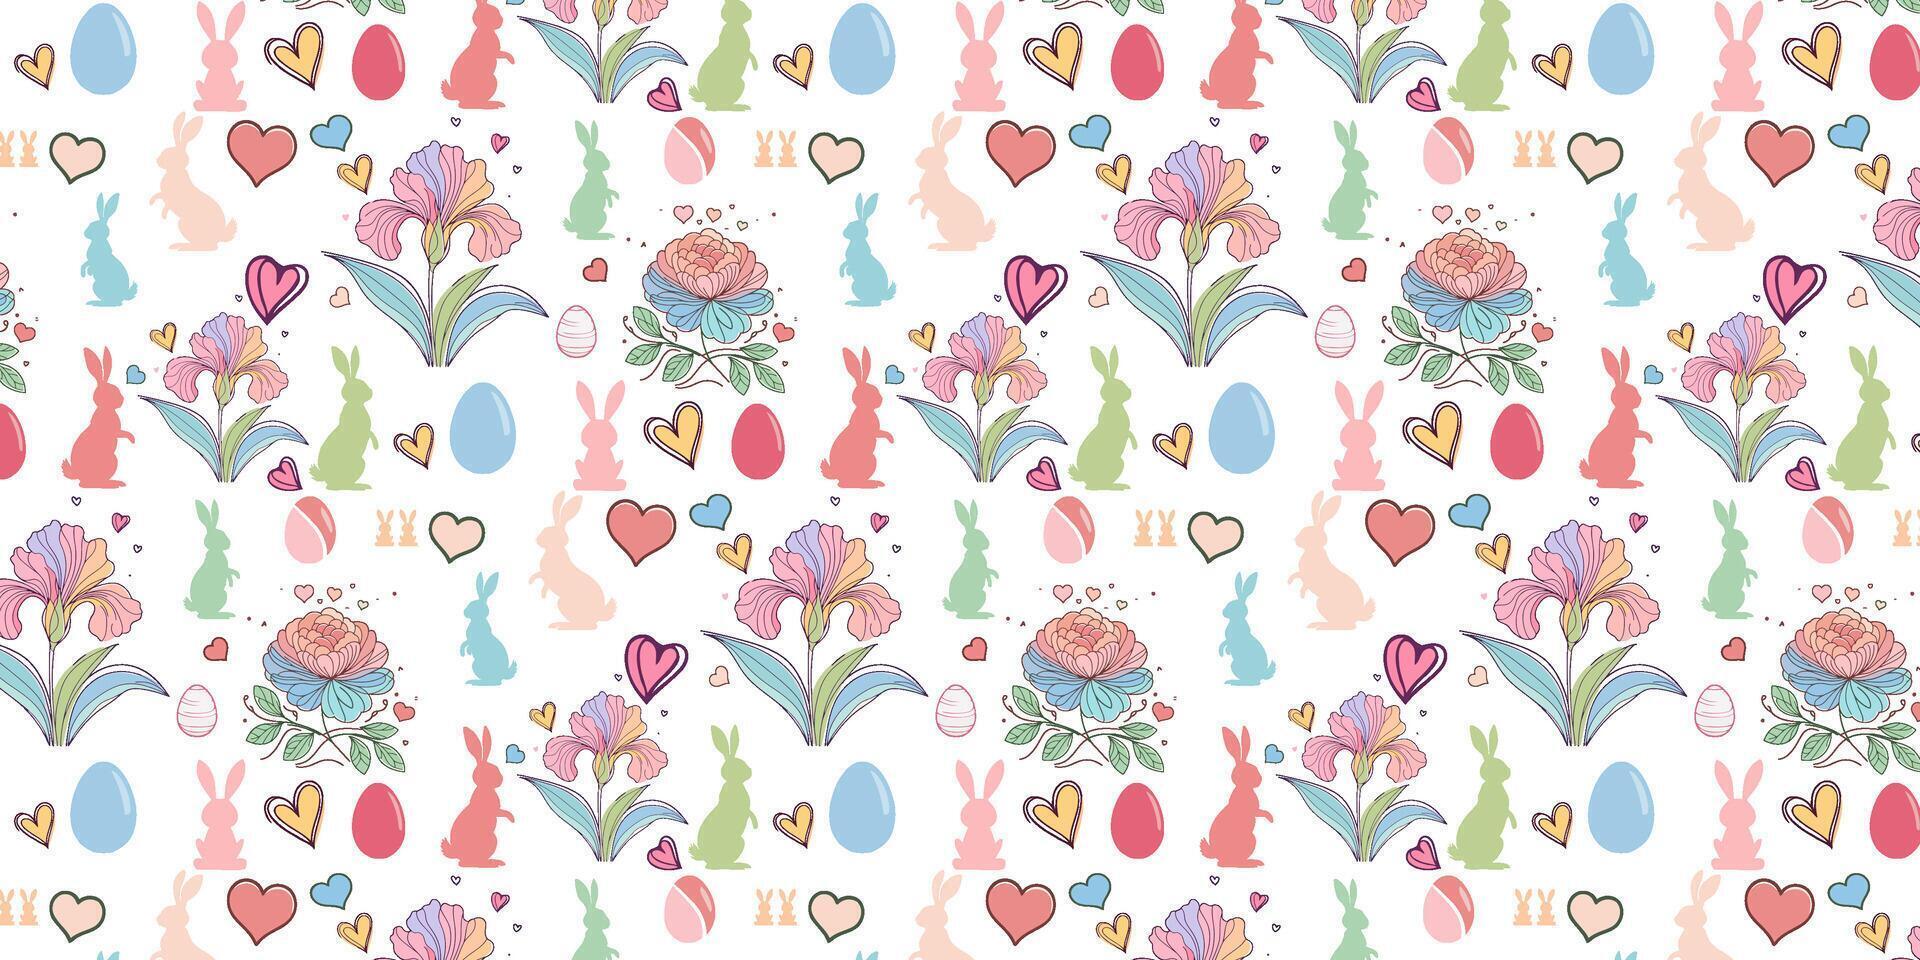 Happy Easter banner featuring trendy hand-painted doodles, dots, eggs, and bunnies in pastel colors. Modern minimalist style suitable for horizontal posters, greeting cards, and website headers vector